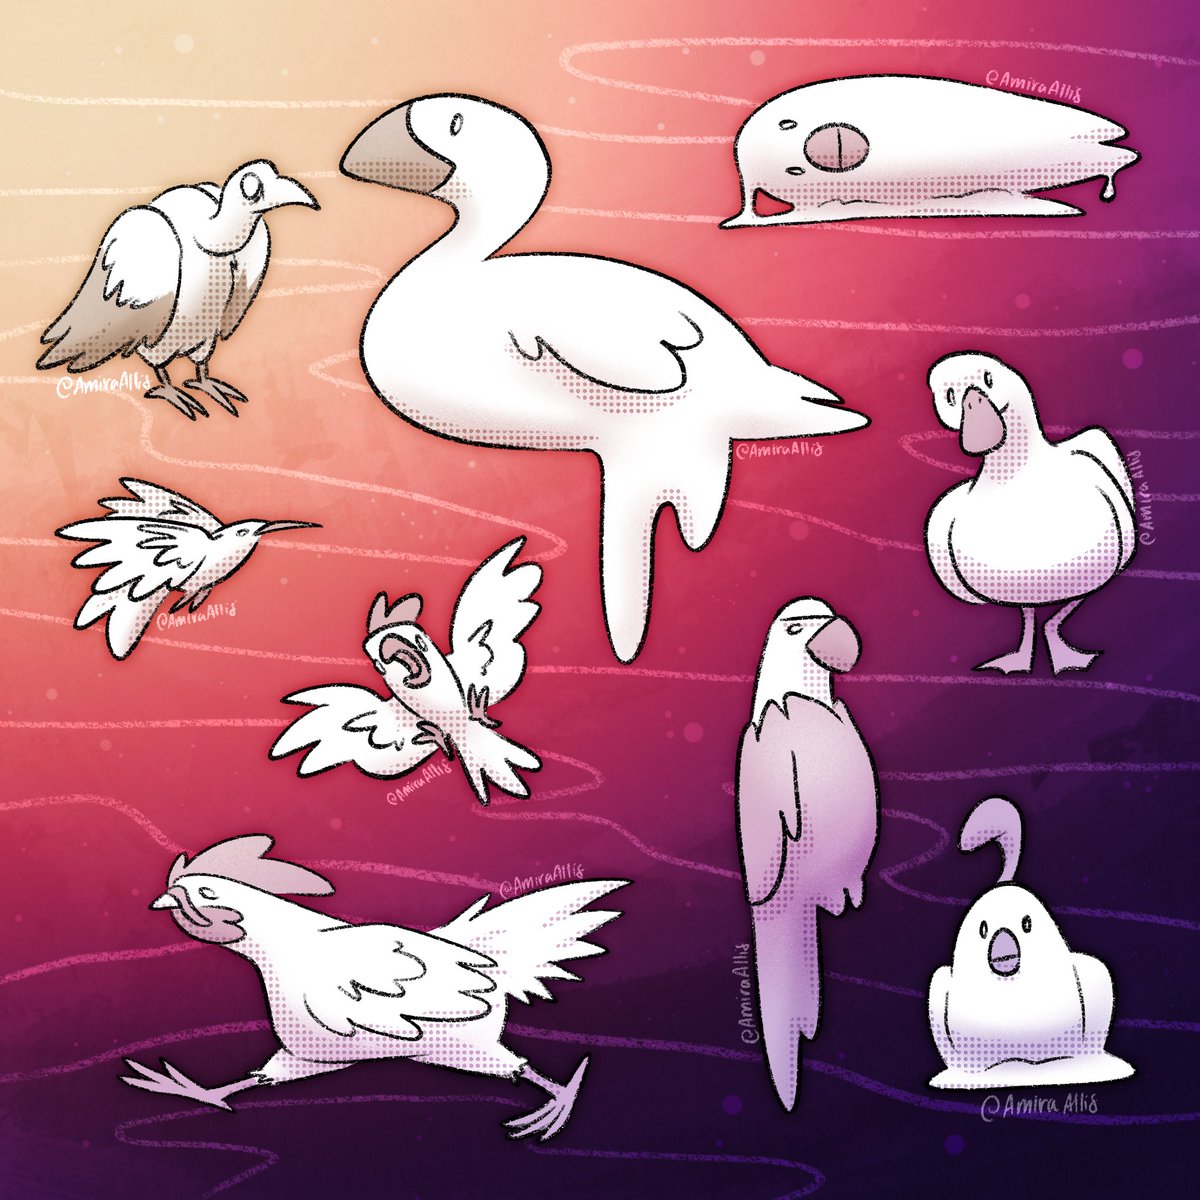 Just some perfectly normal birds